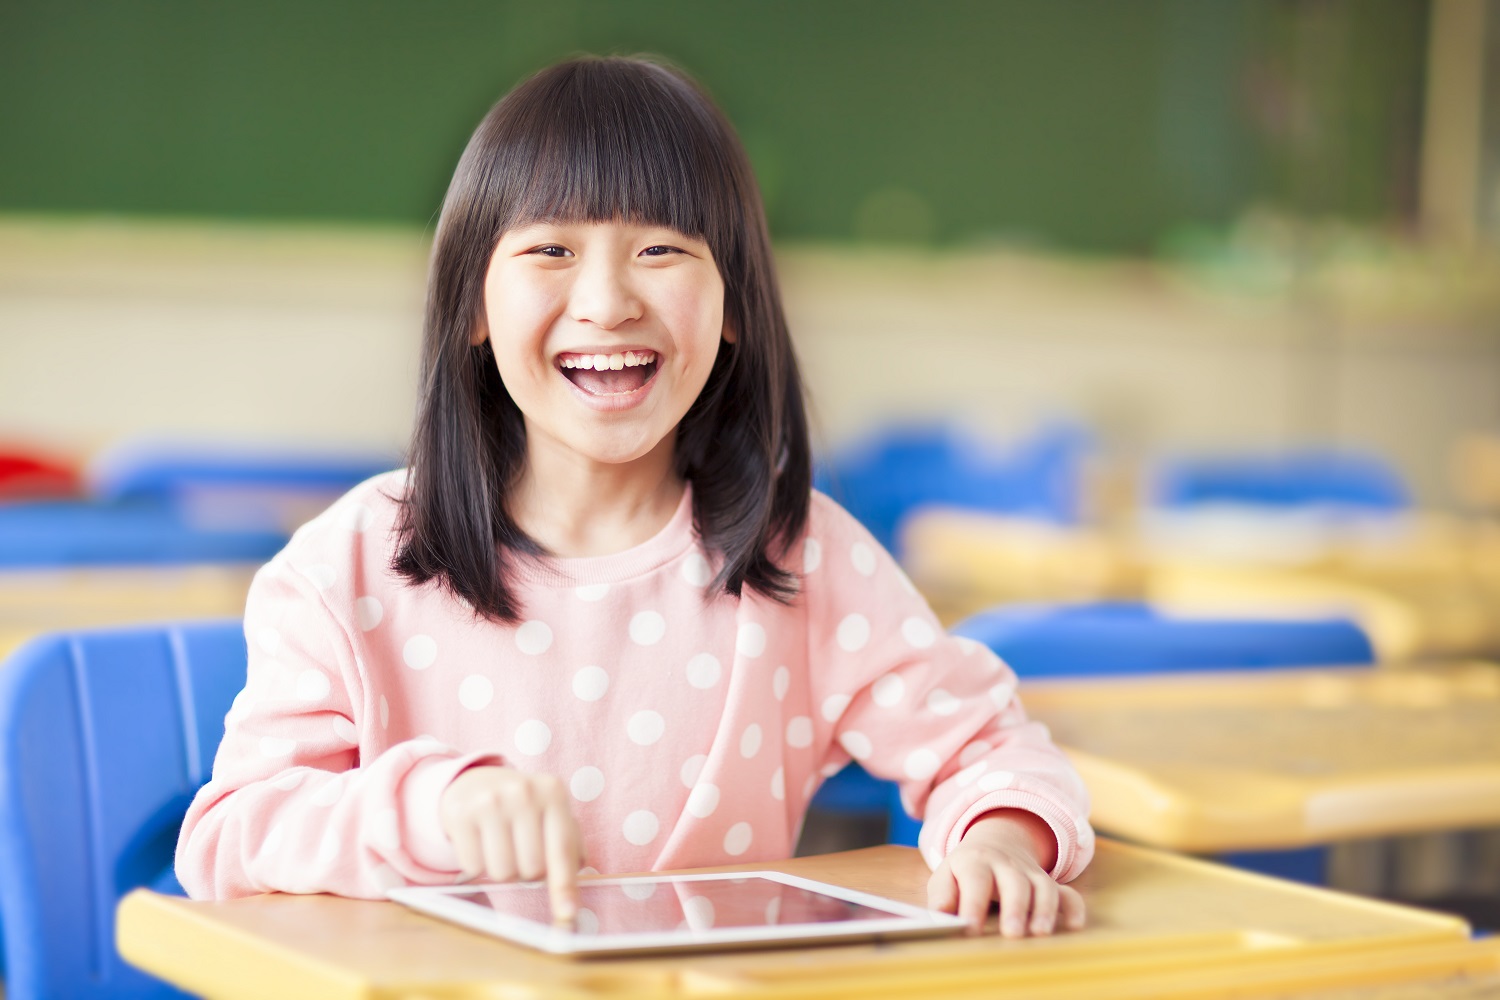 a young girl smiling while using a tablet